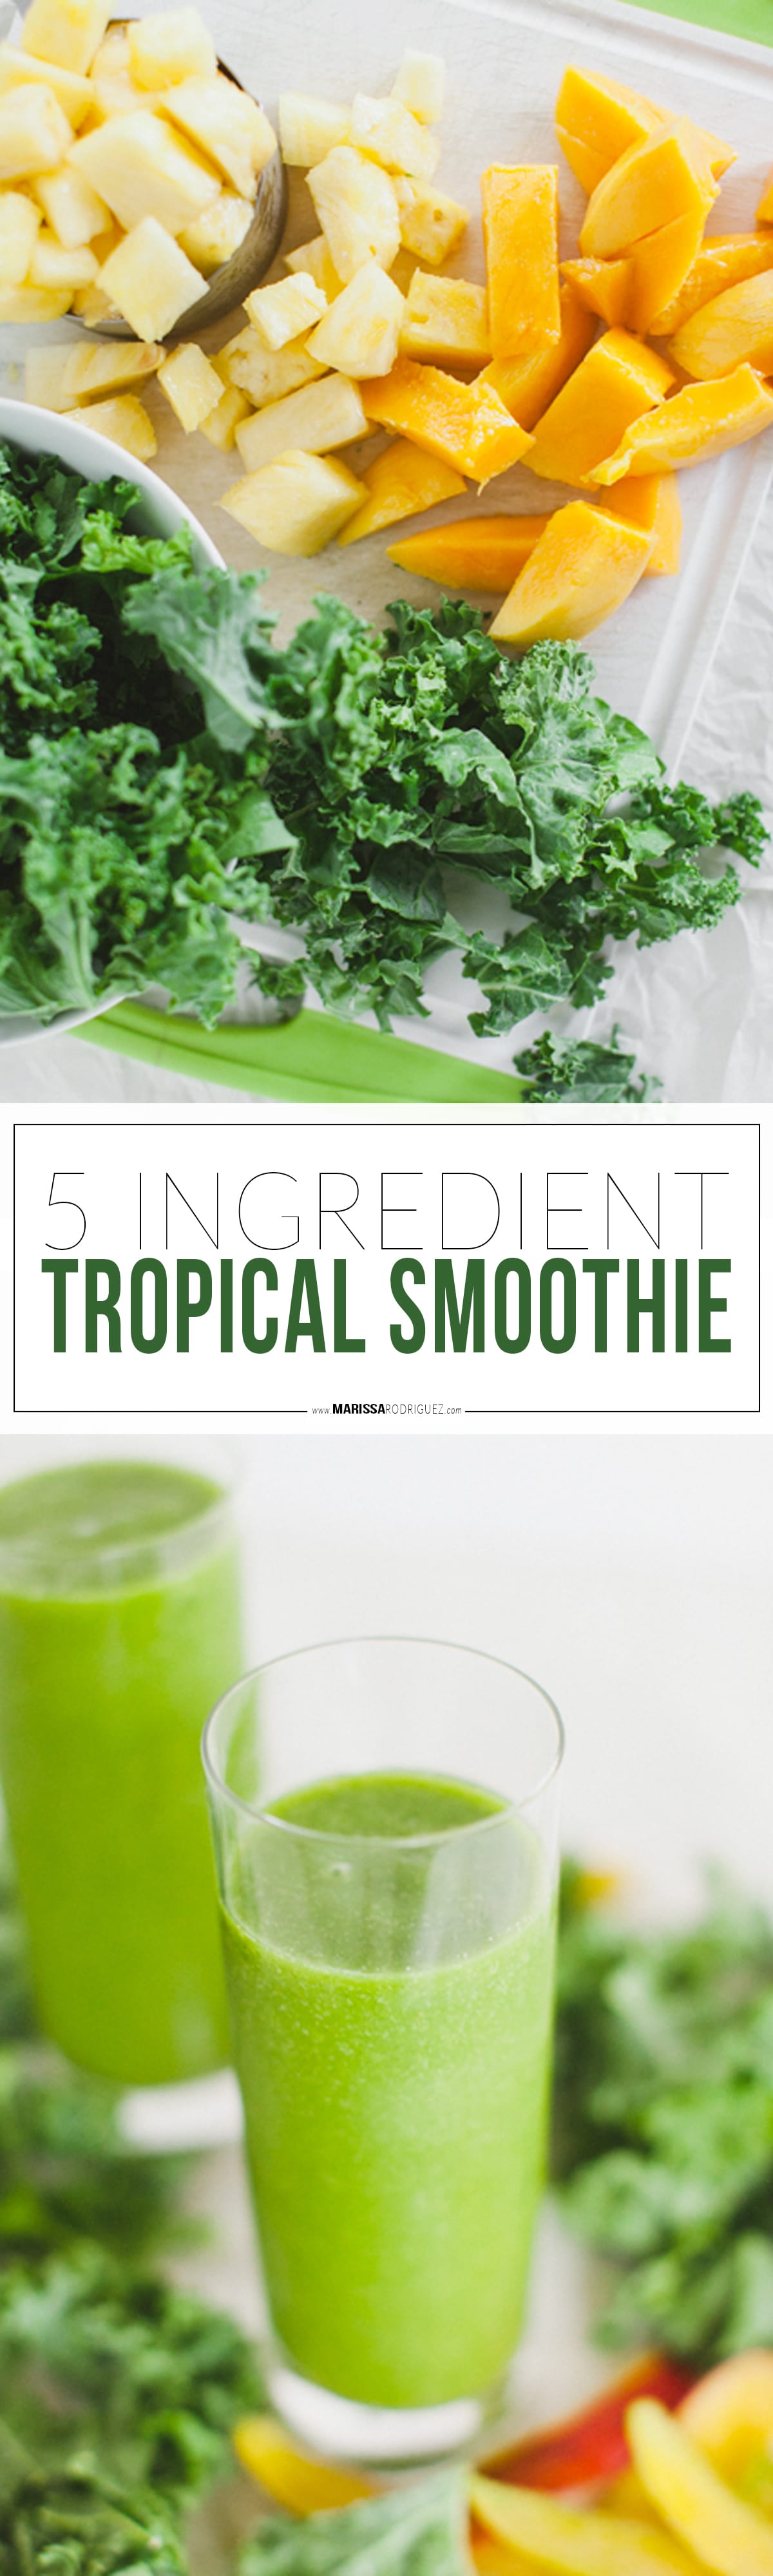 Easy 5 ingredient tropical smoothie